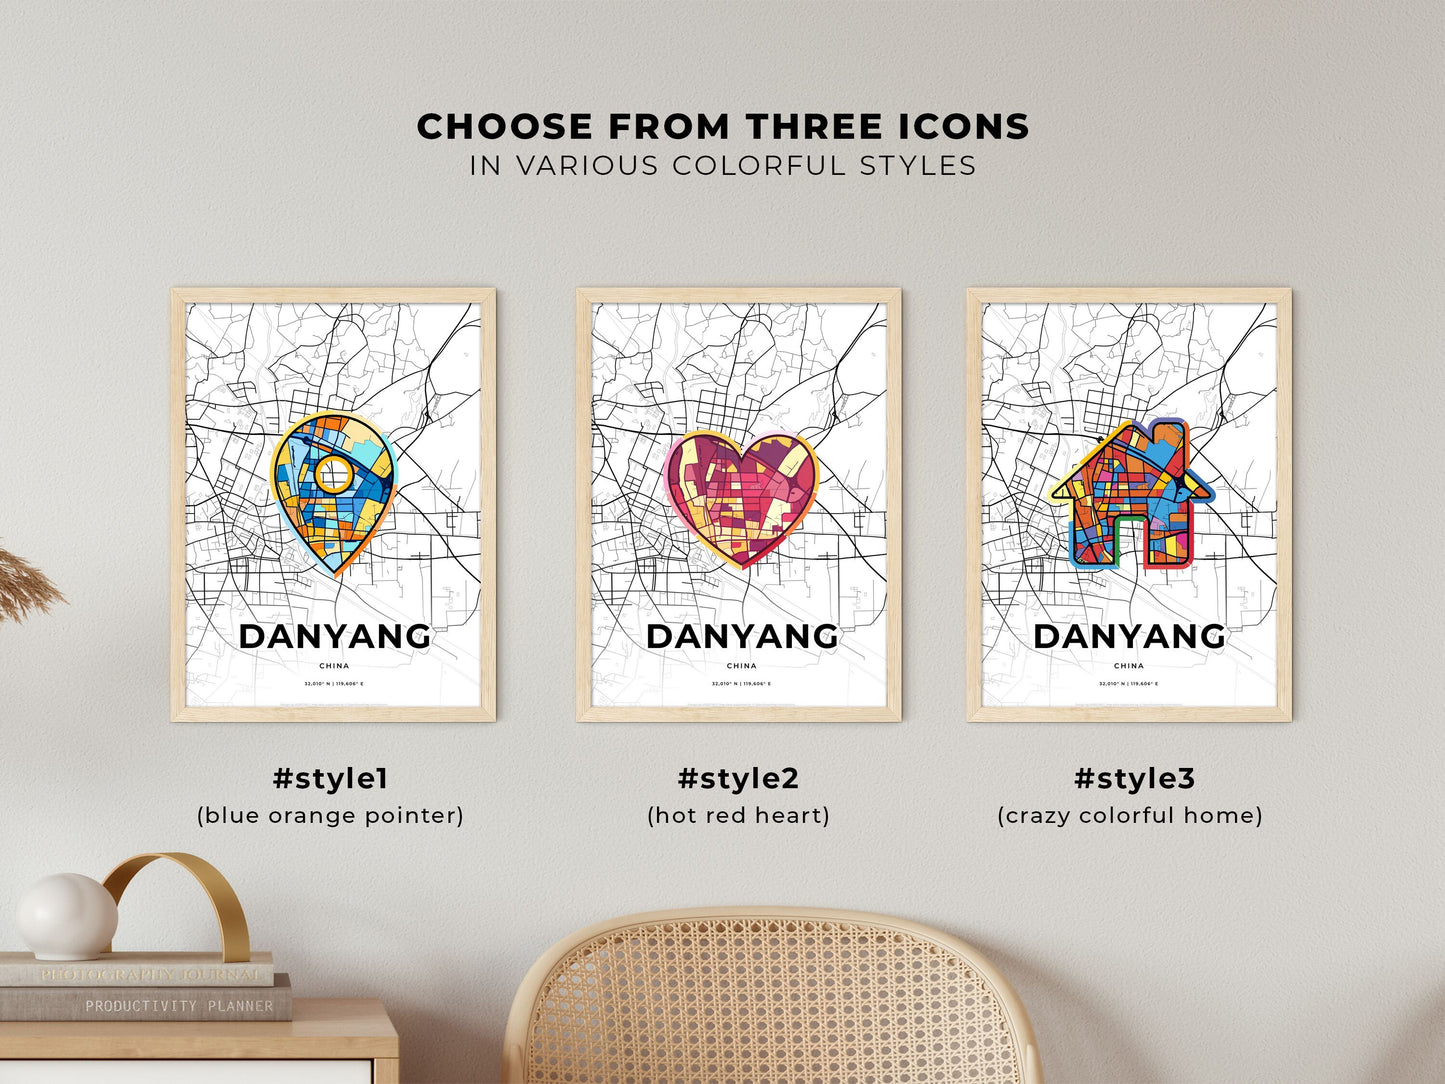 DANYANG CHINA minimal art map with a colorful icon. Where it all began, Couple map gift.